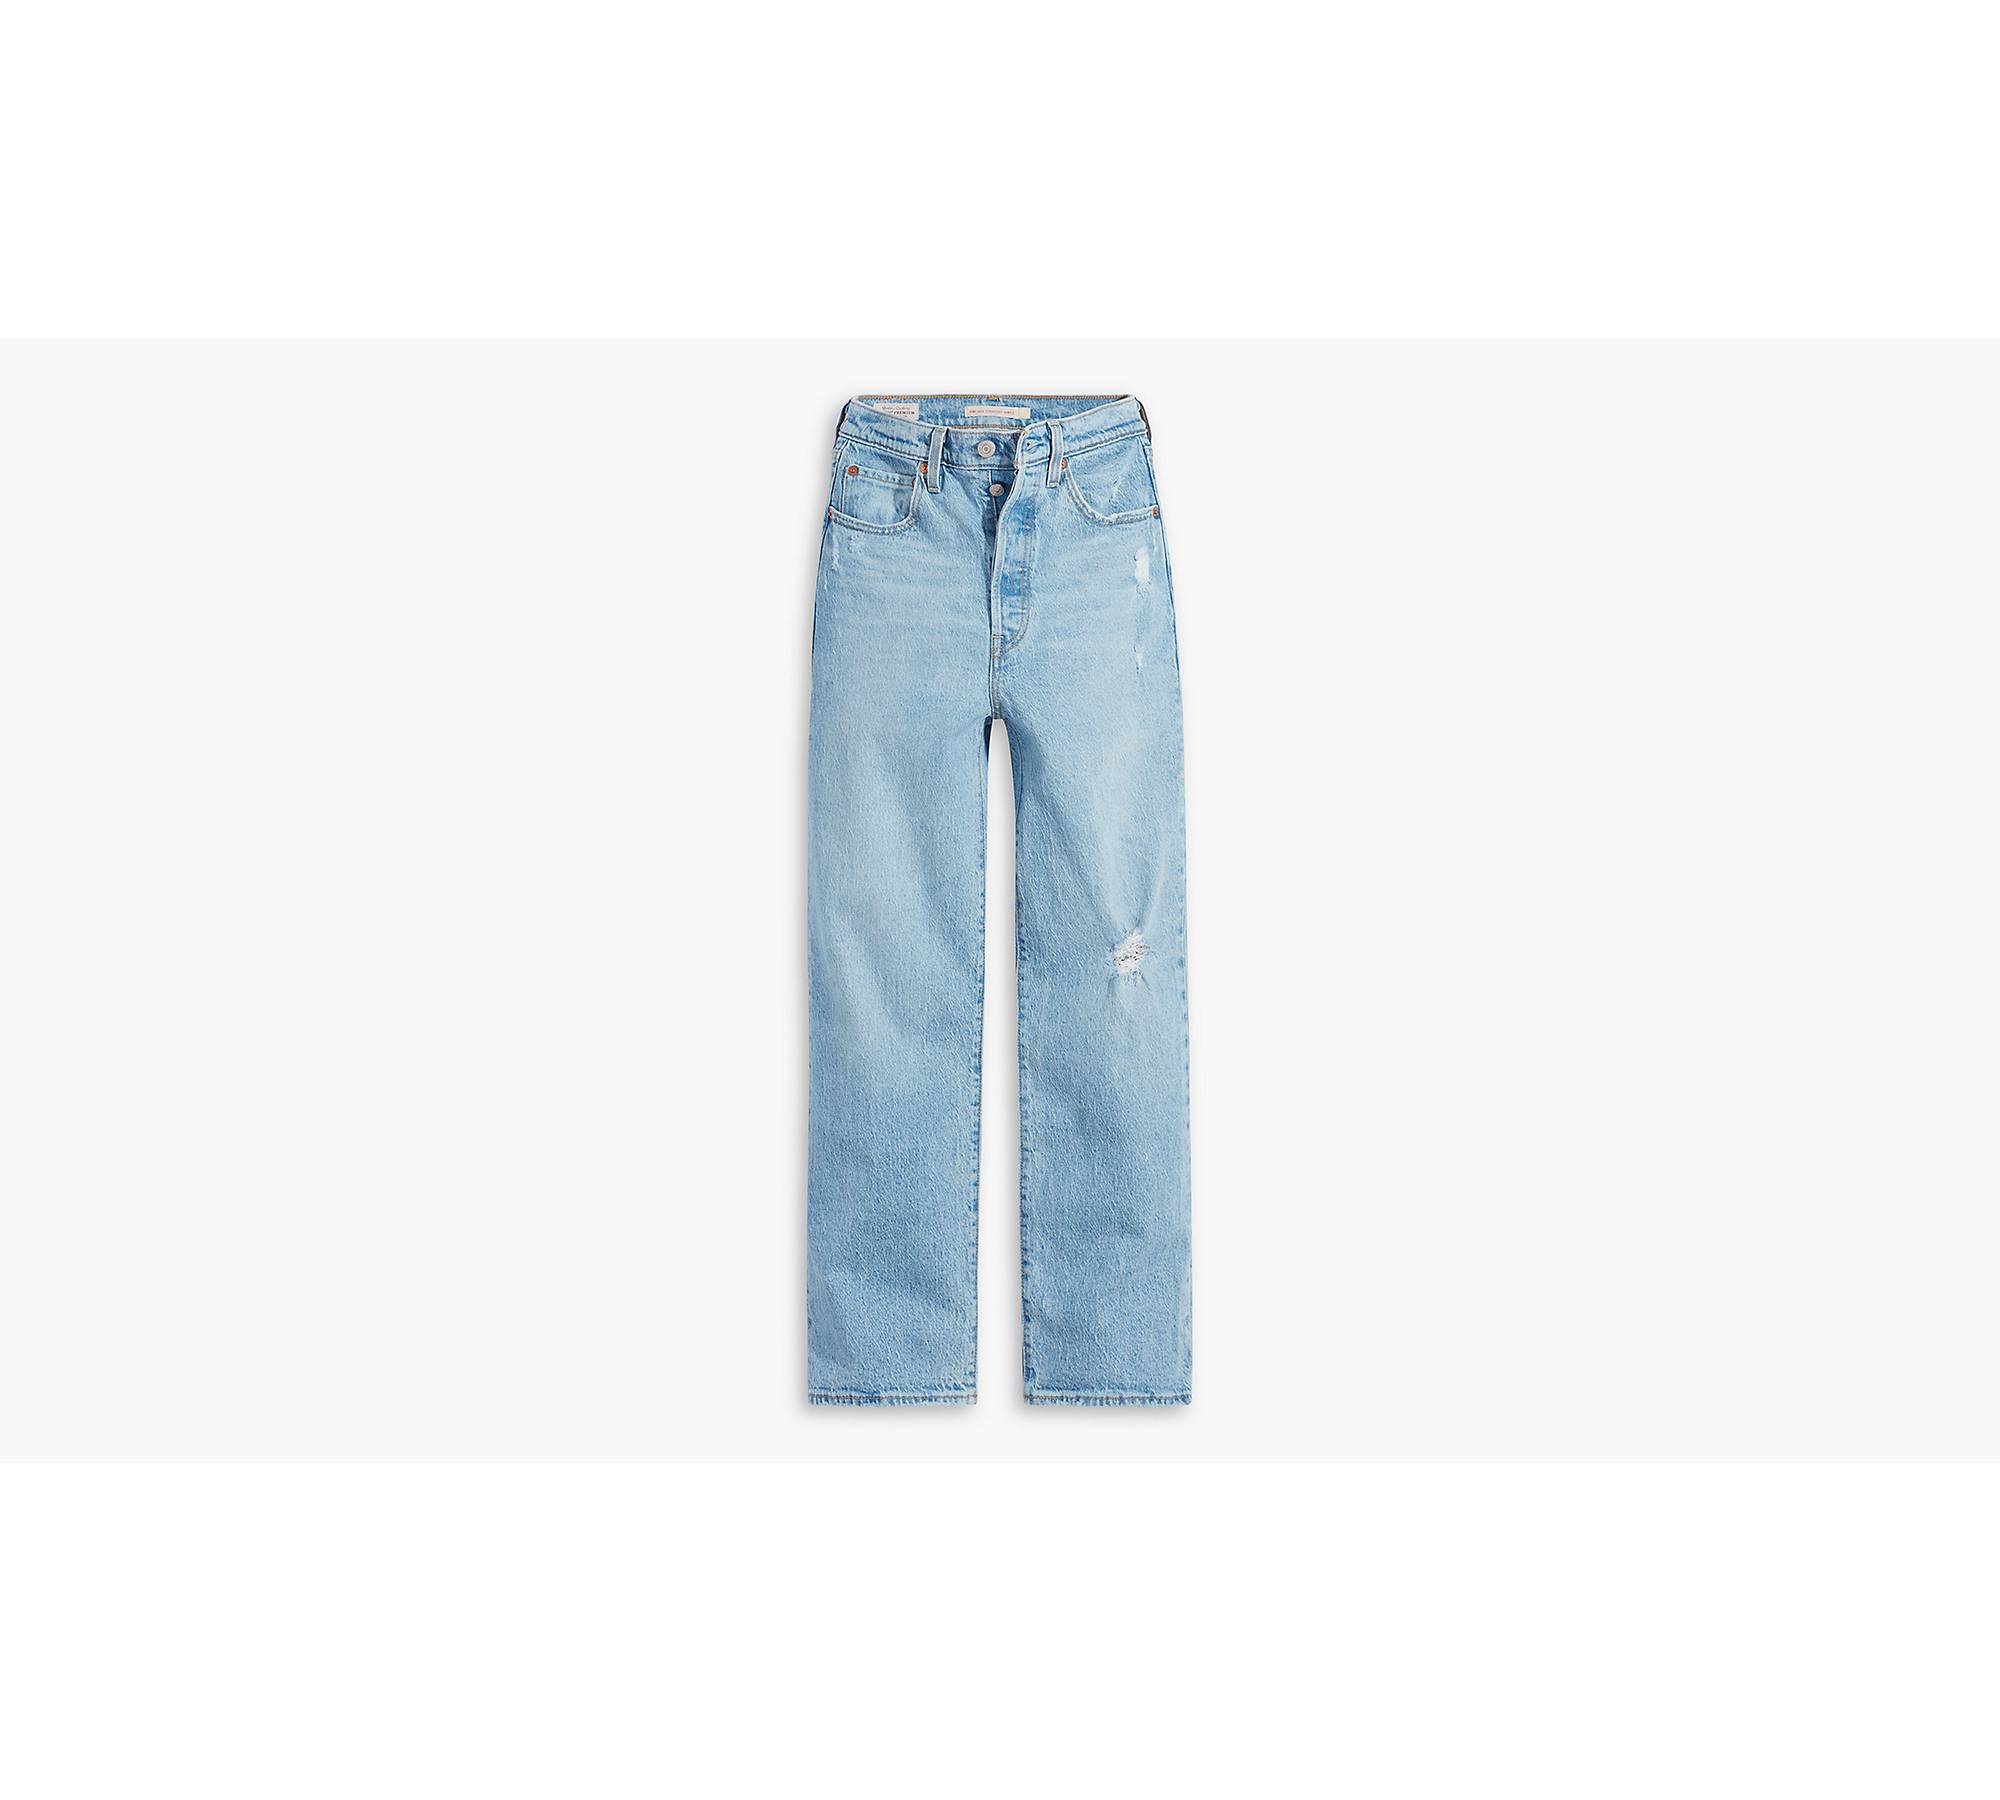 Levi's Ribcage Straight Ankle Jeans in Fall Storm Light Wash Size